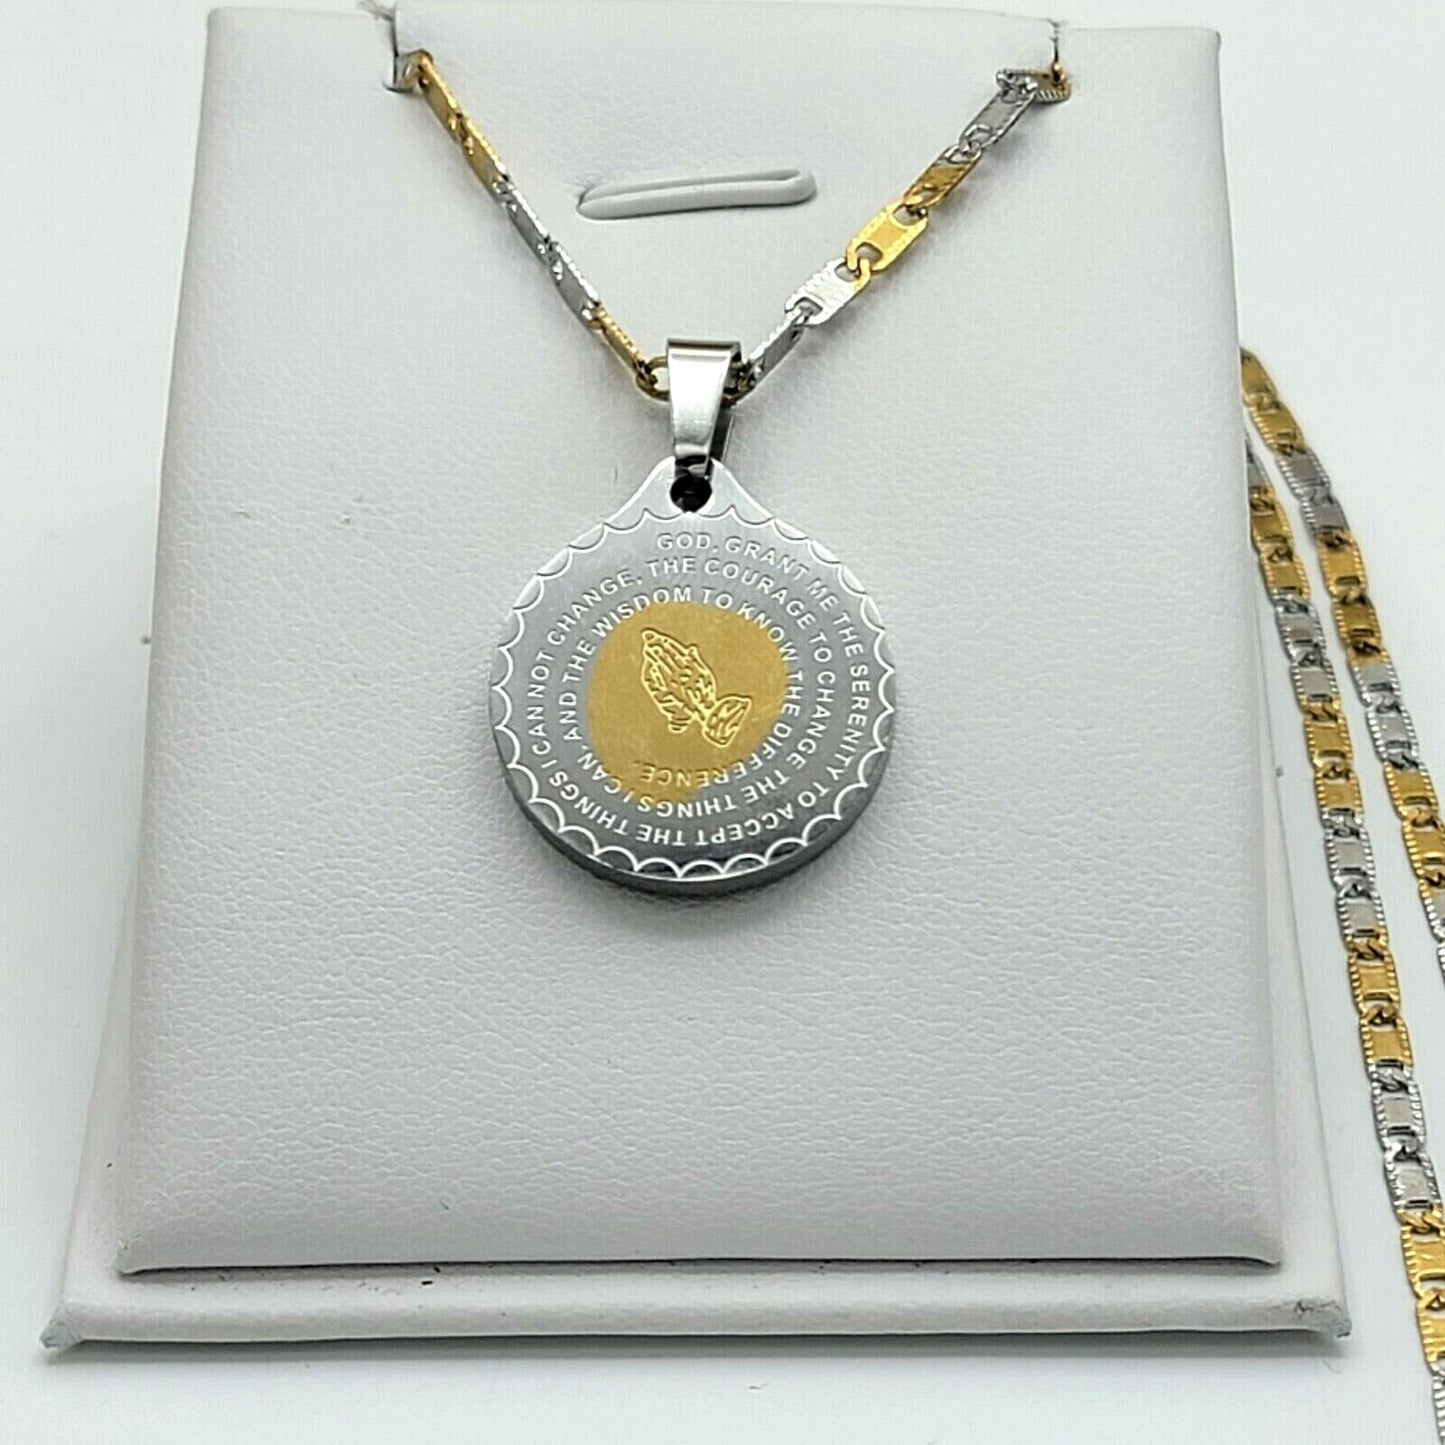 Necklaces - Stainless Steel Gold Plated. Serenity Prayer Medallion & Chain.